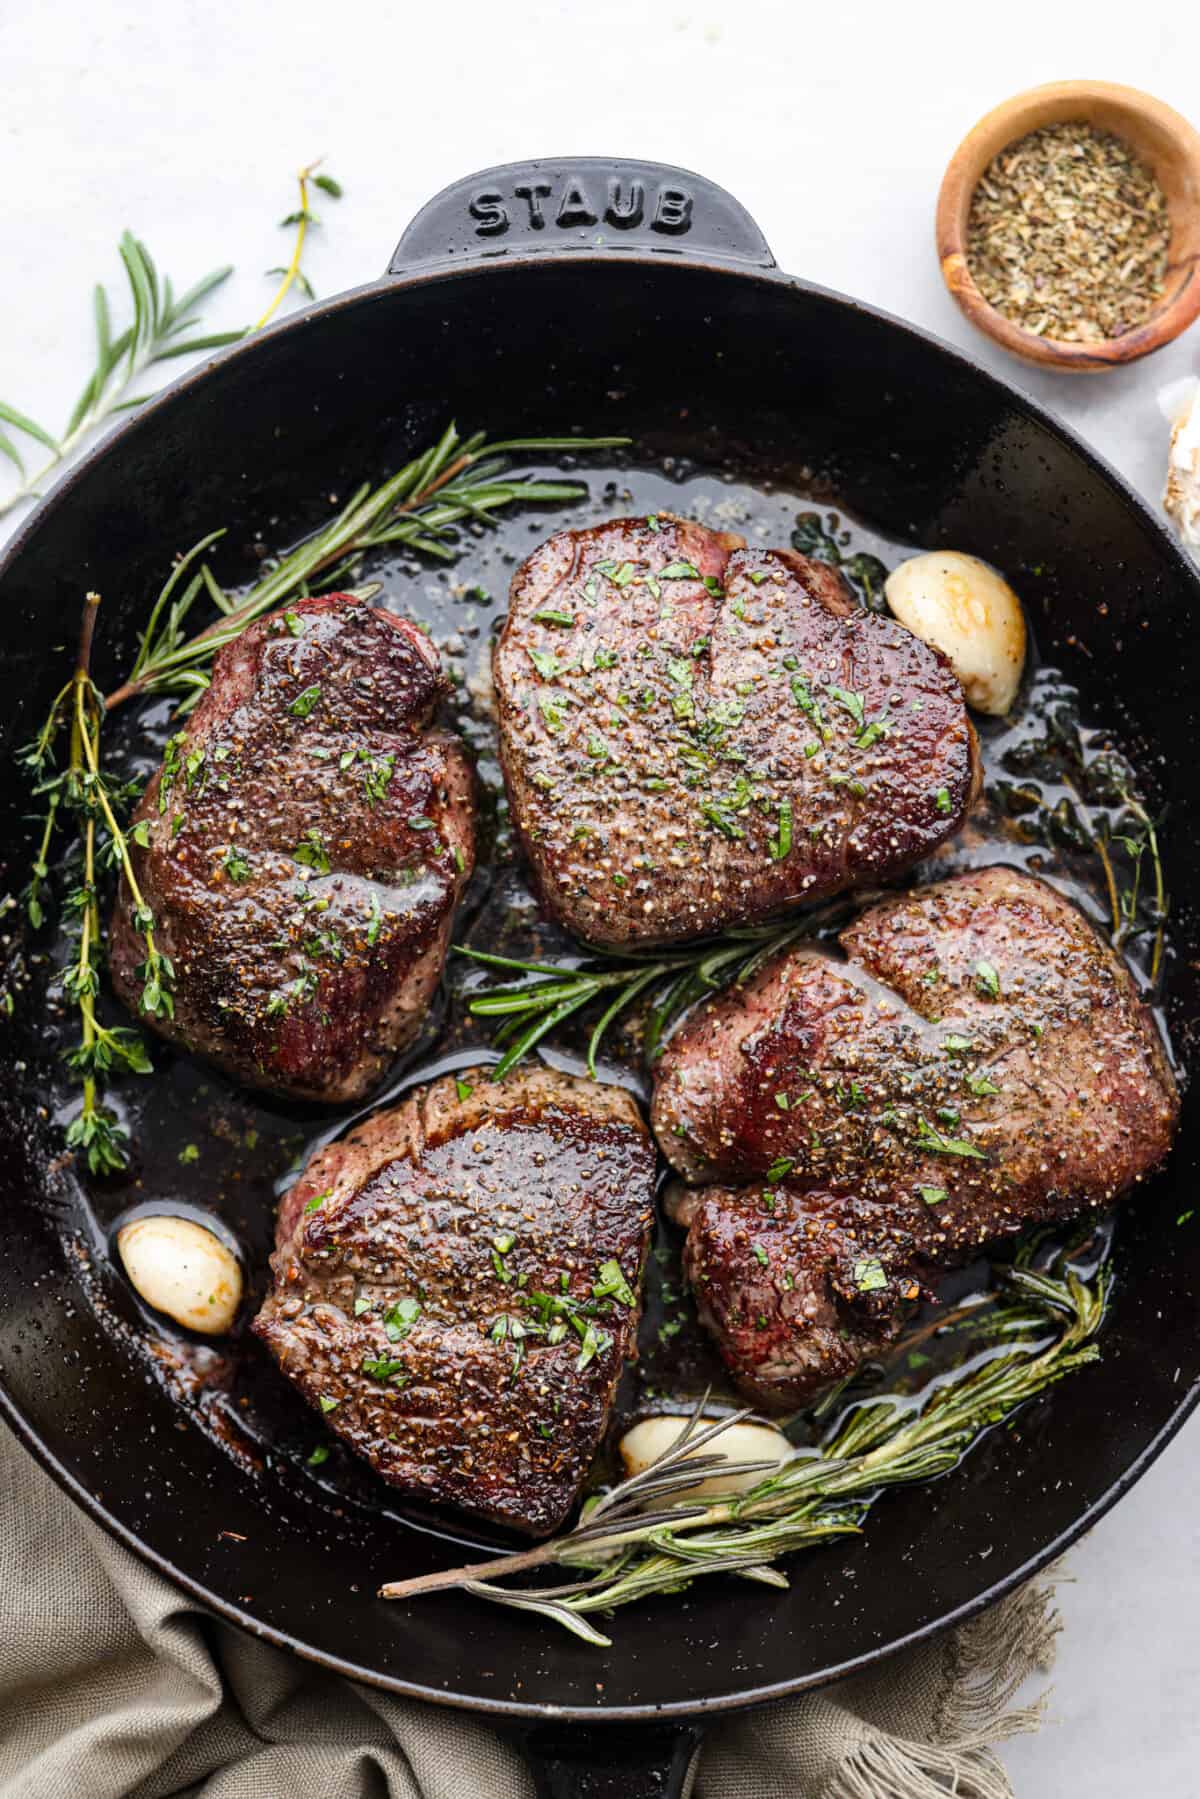 Top view of filet mignon in a black cast iron pan with garlic and herbs.